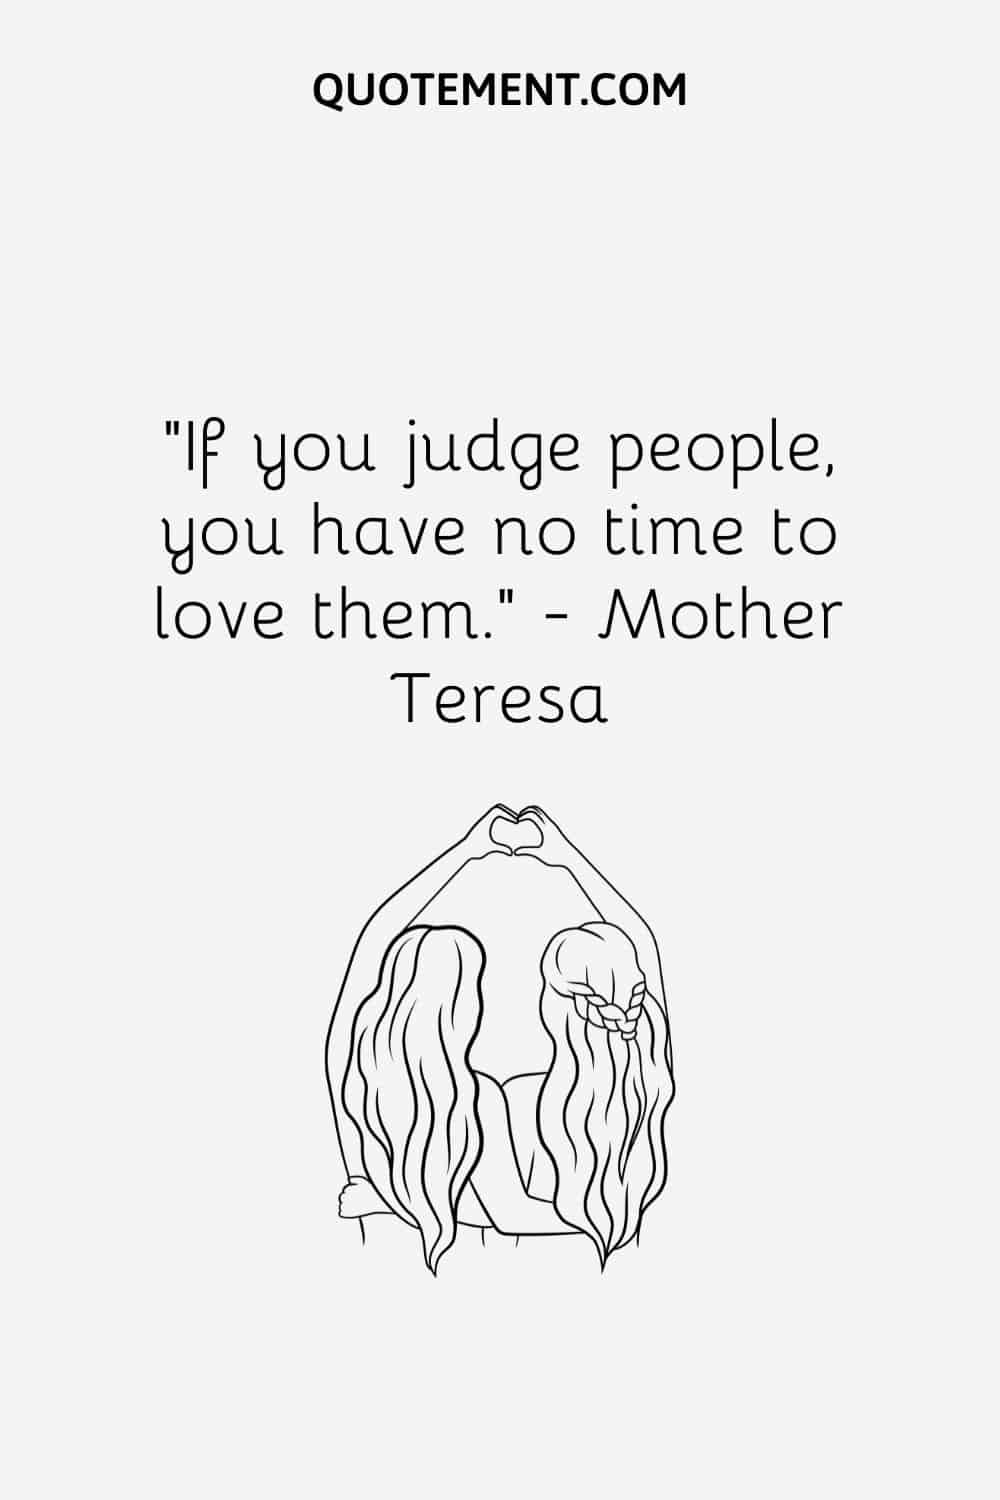 “If you judge people, you have no time to love them.” — Mother Teresa